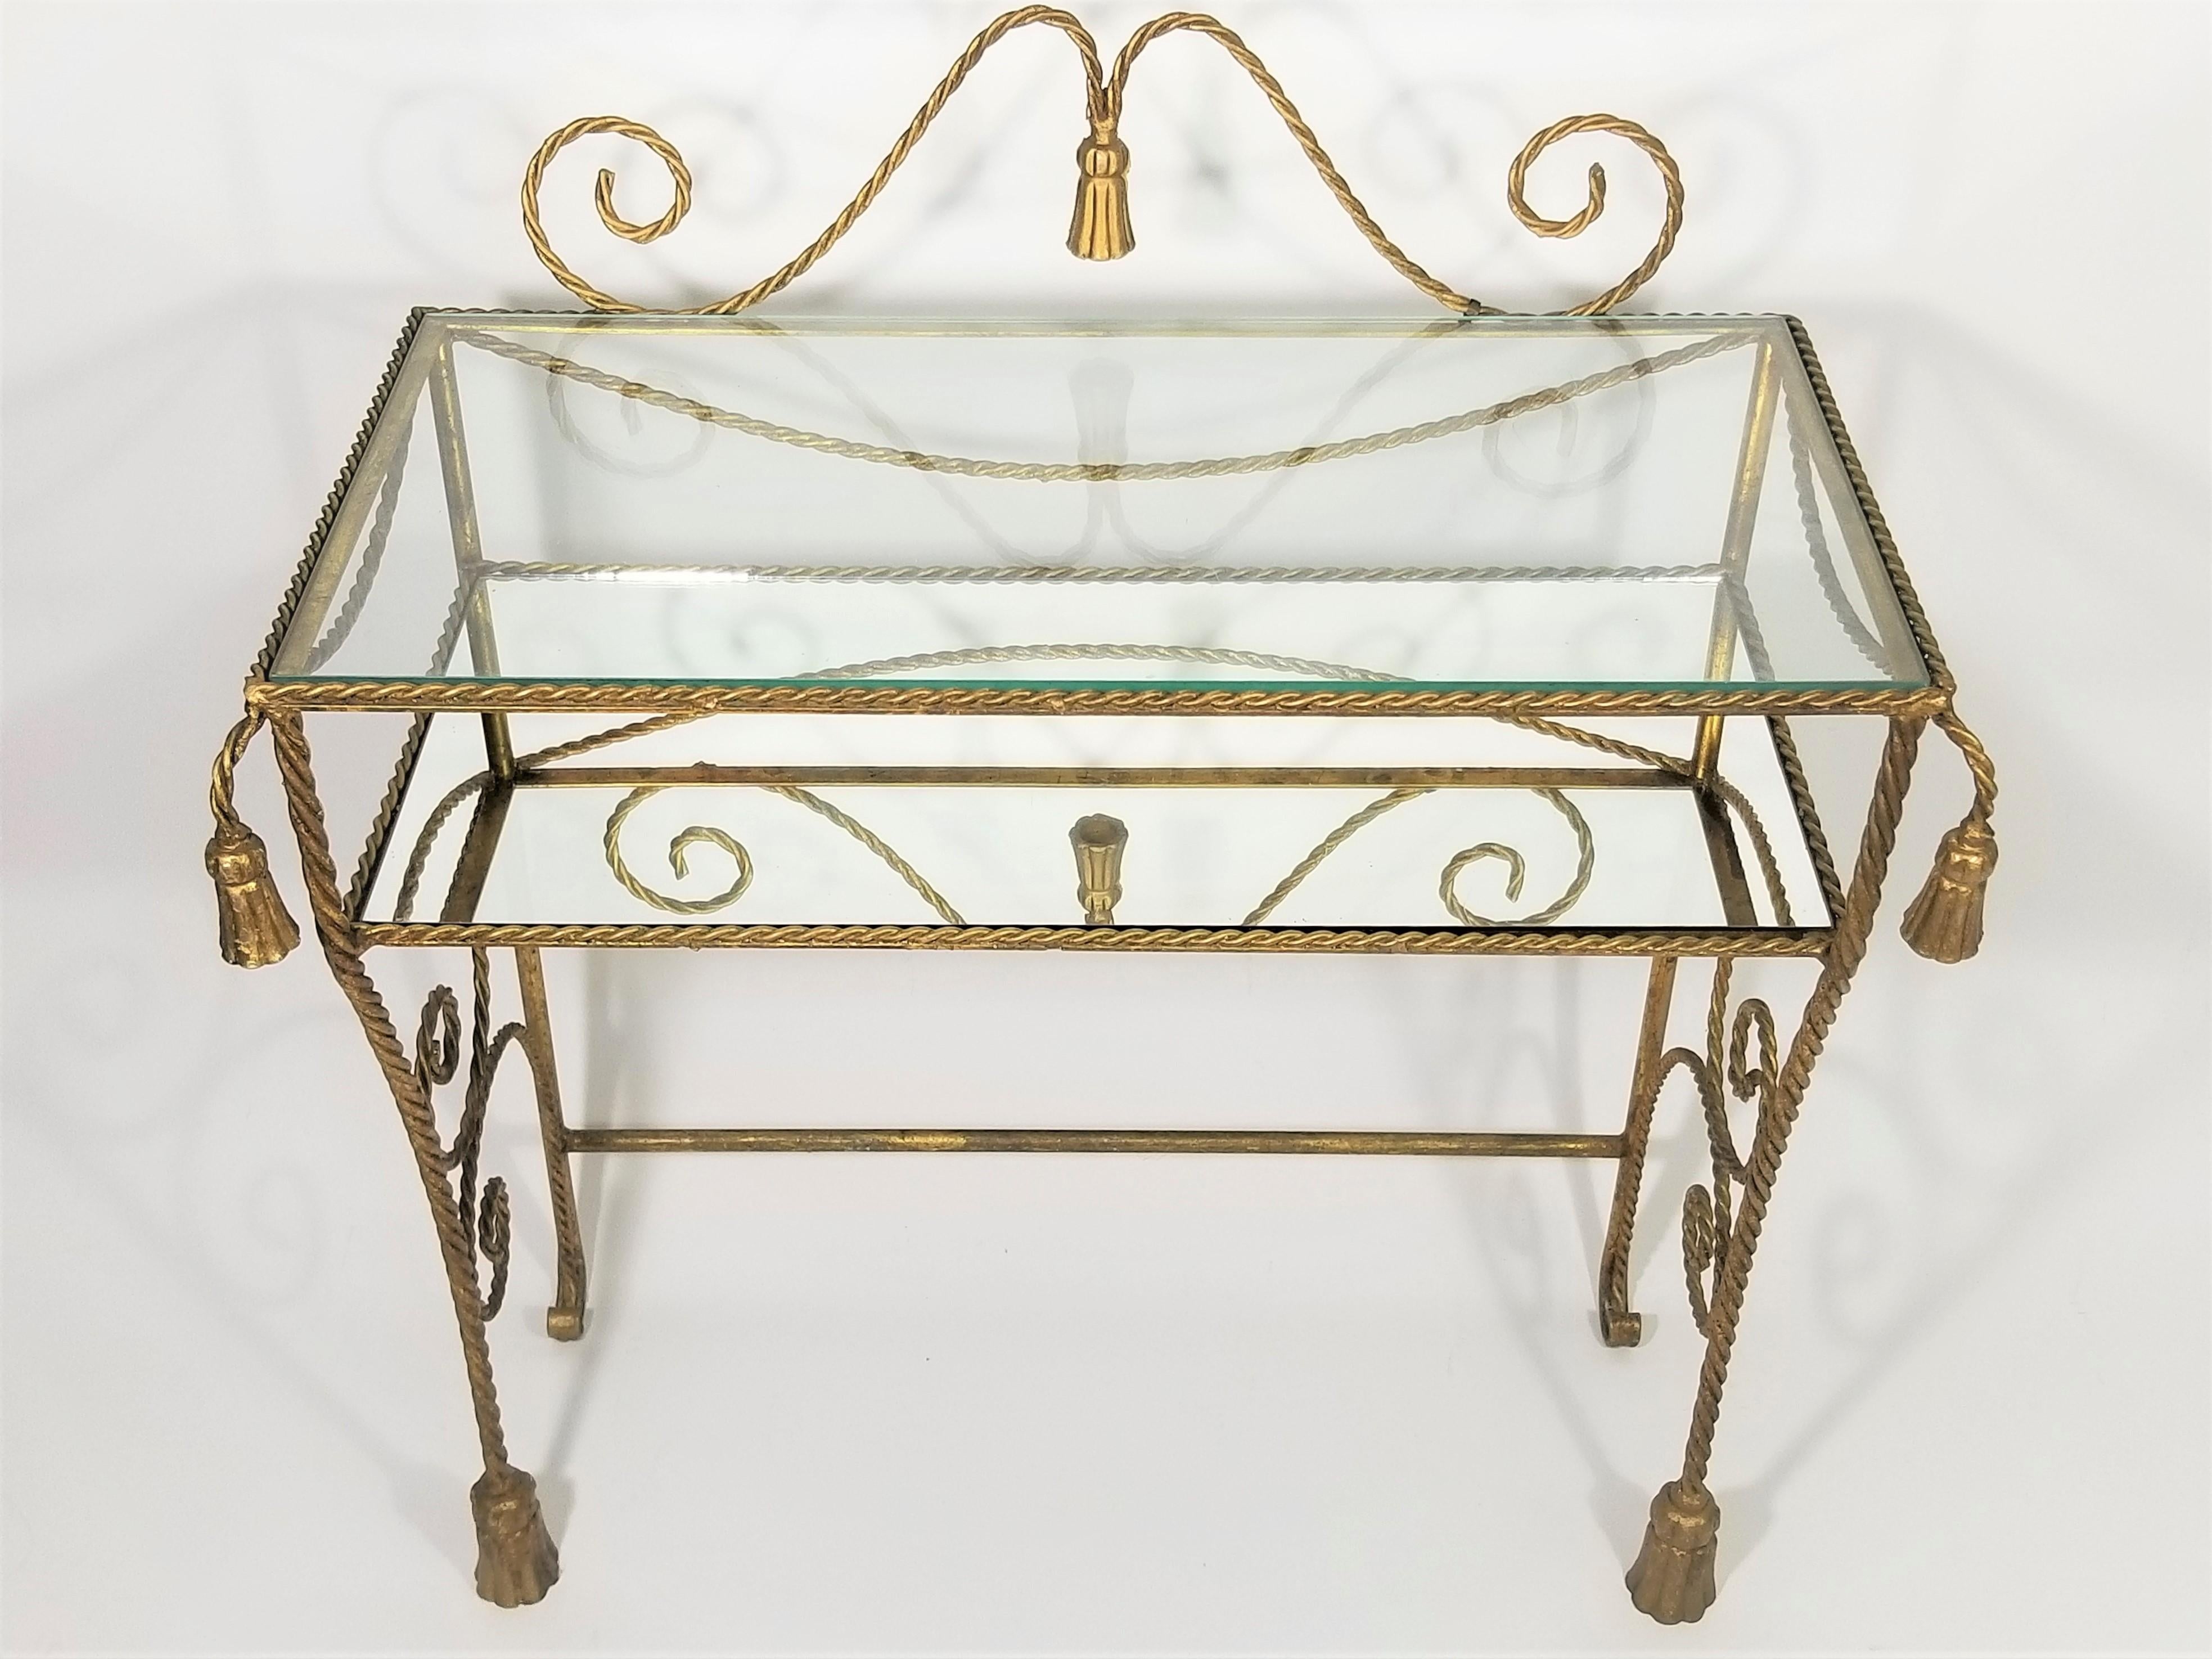 Lovely midcentury 1950s-1960s gilt iron Italian 2-tiered vanity or dressing table. Still retains original metal “Made in Italy” marking tag. Rope and tassel motif. Upper tier is glass and lower tier is a mirror. Petite size would make it ideal for